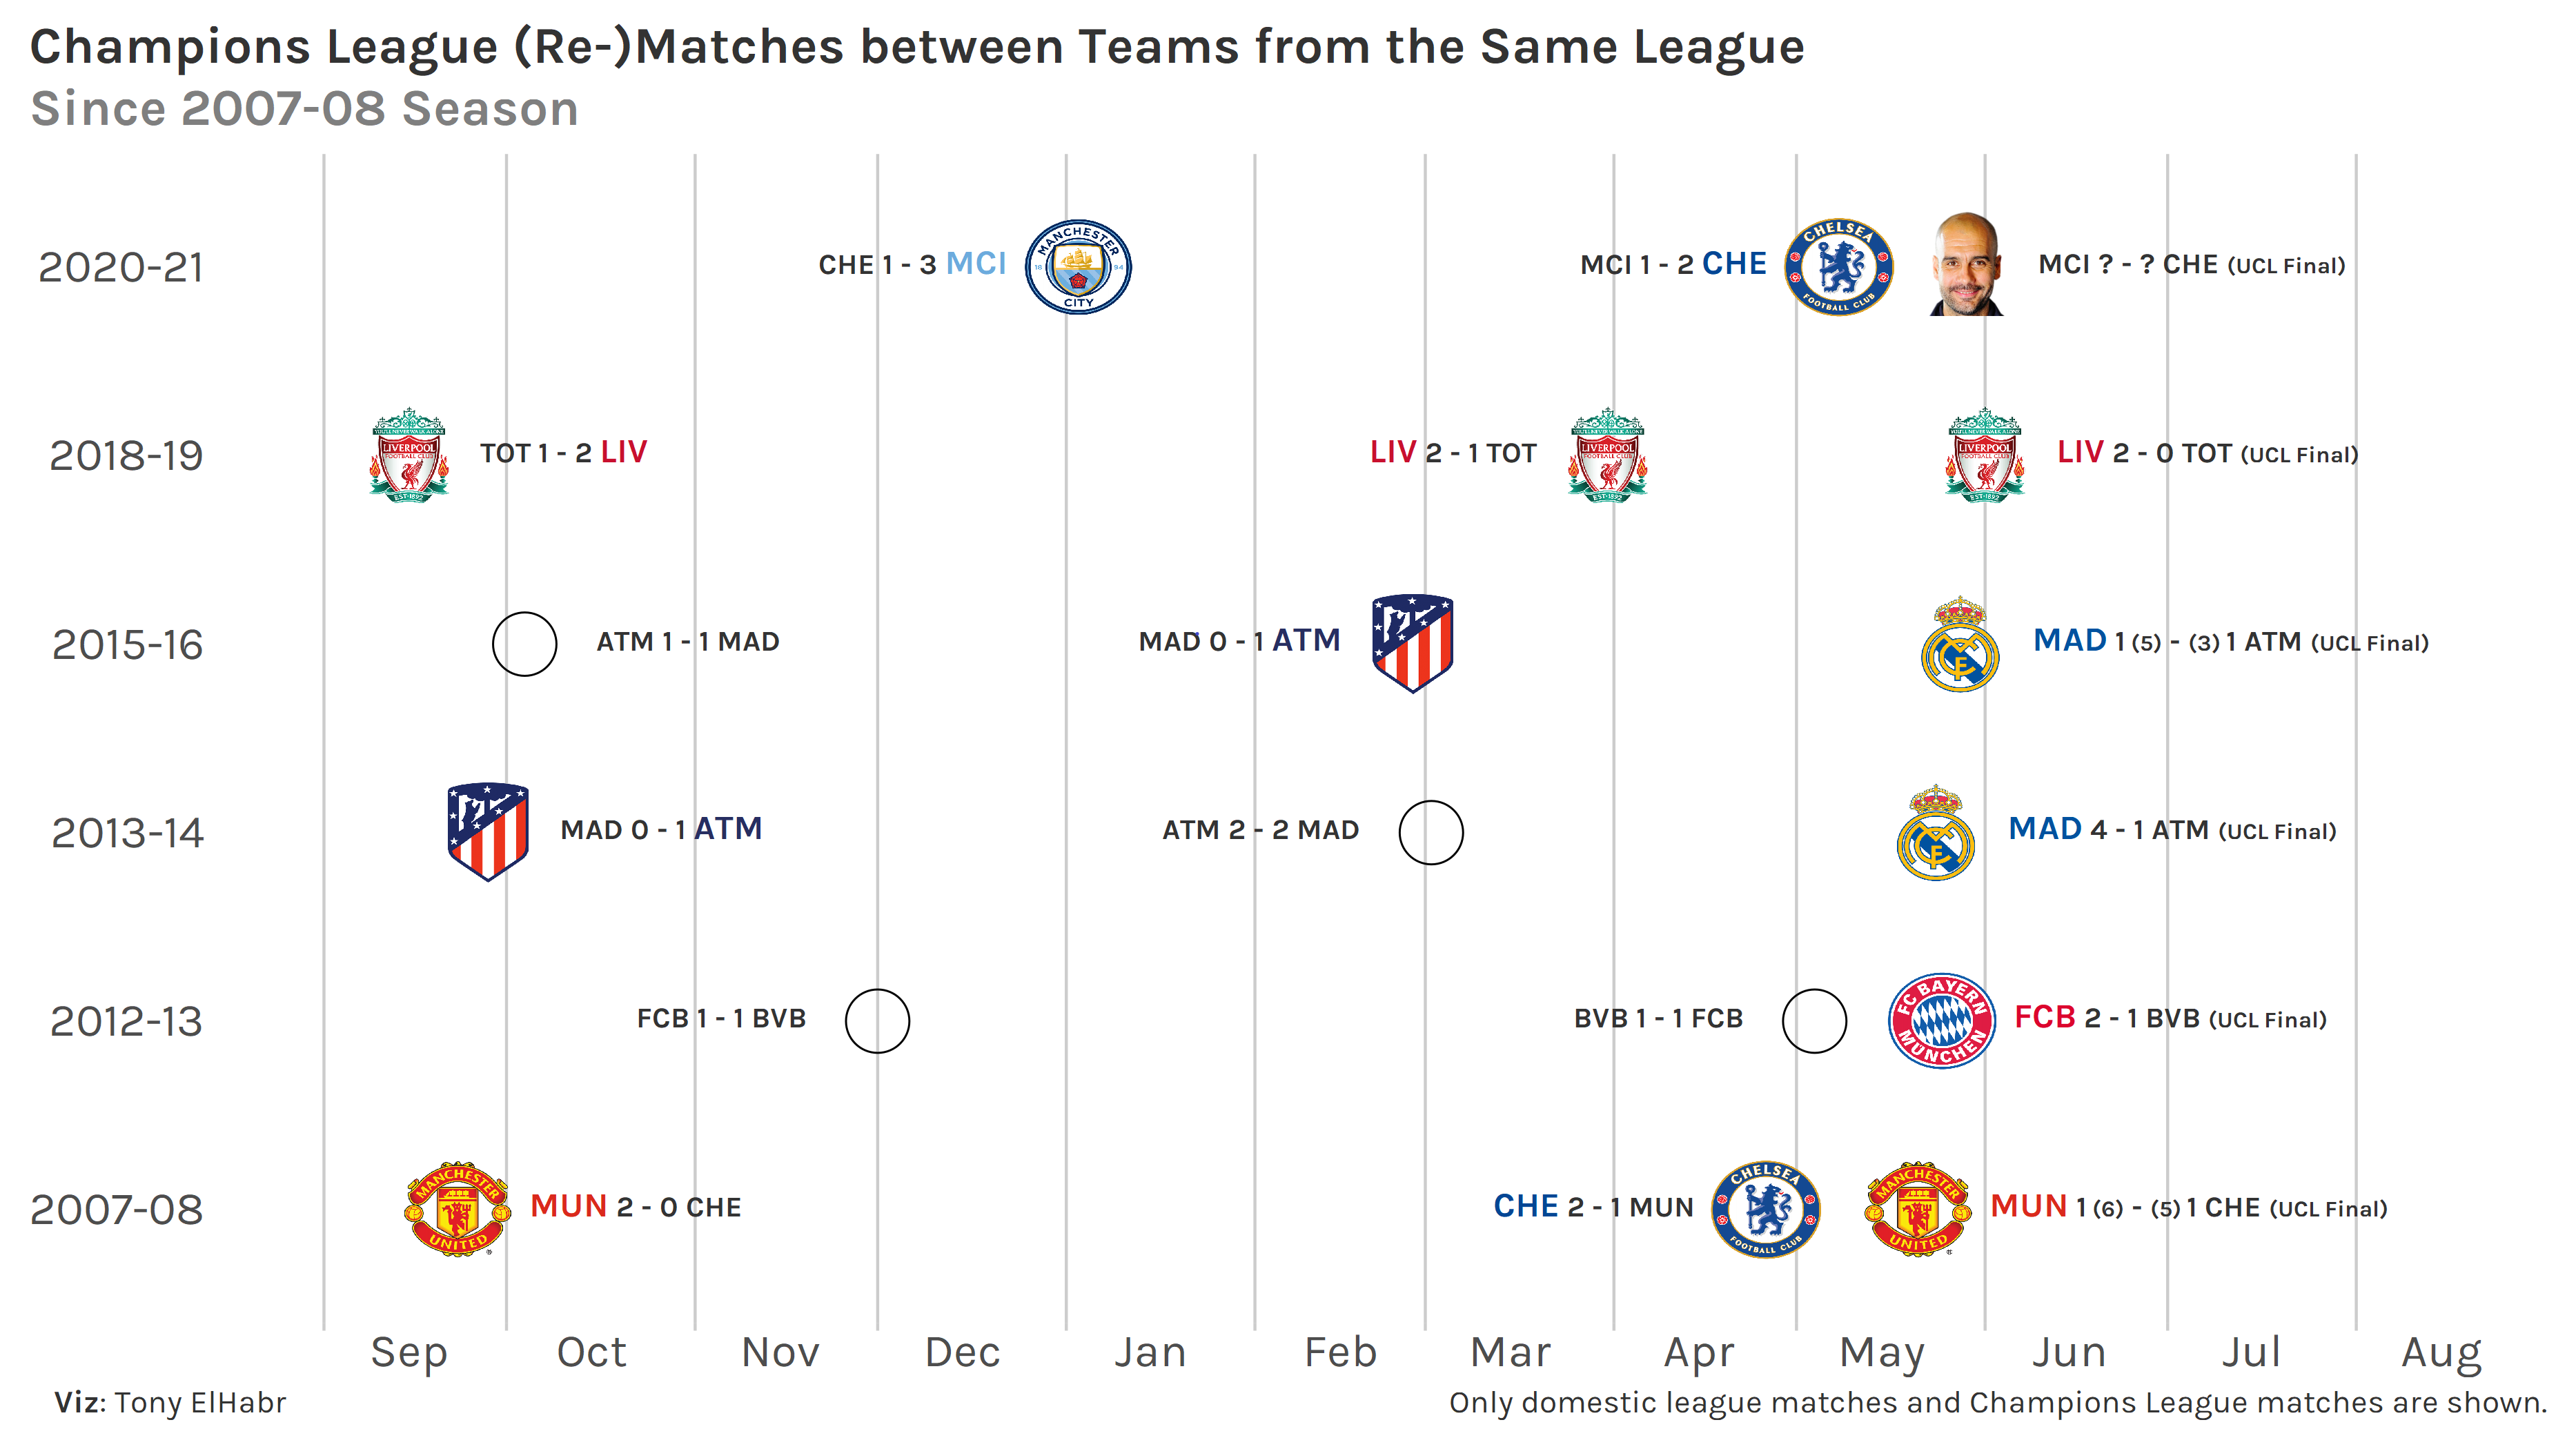 Timeline Plot of Champions League Re-matches between Teams from the Same League